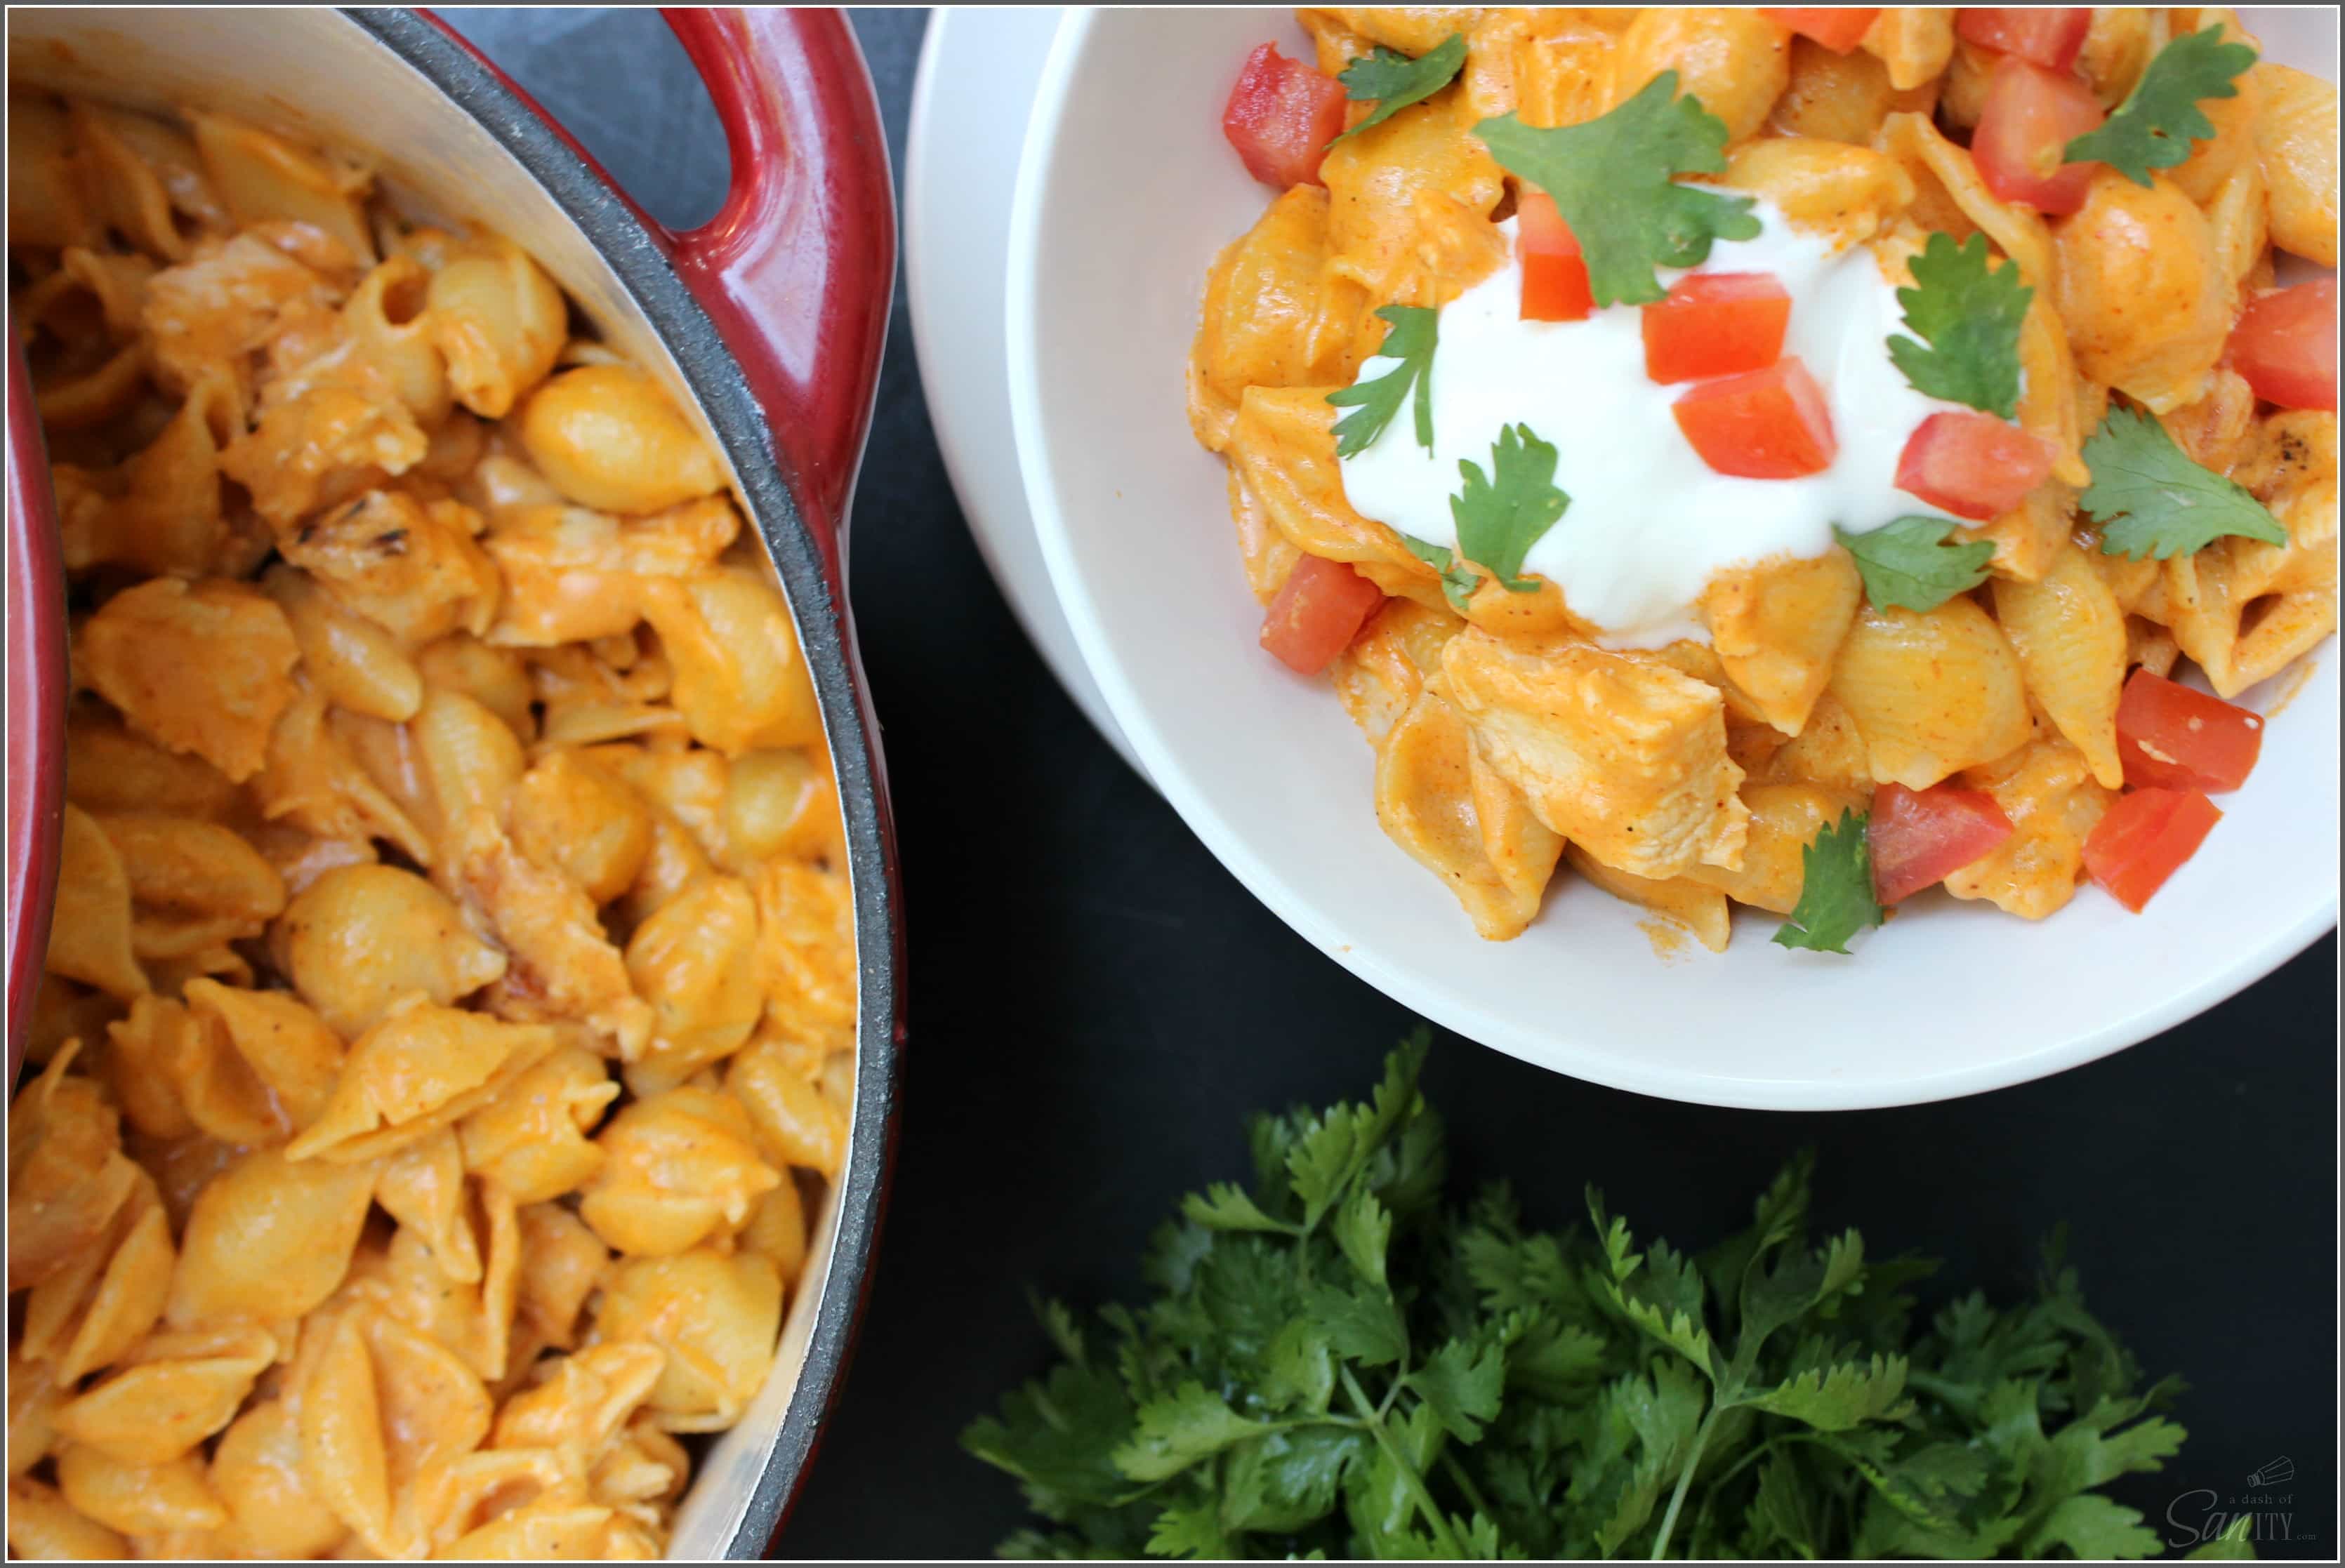 This Creamy Chicken Enchilada Mac & Cheese is a twist on two classics, made with a 3-cheese enchilada sauce and tossed with chicken and noodles.